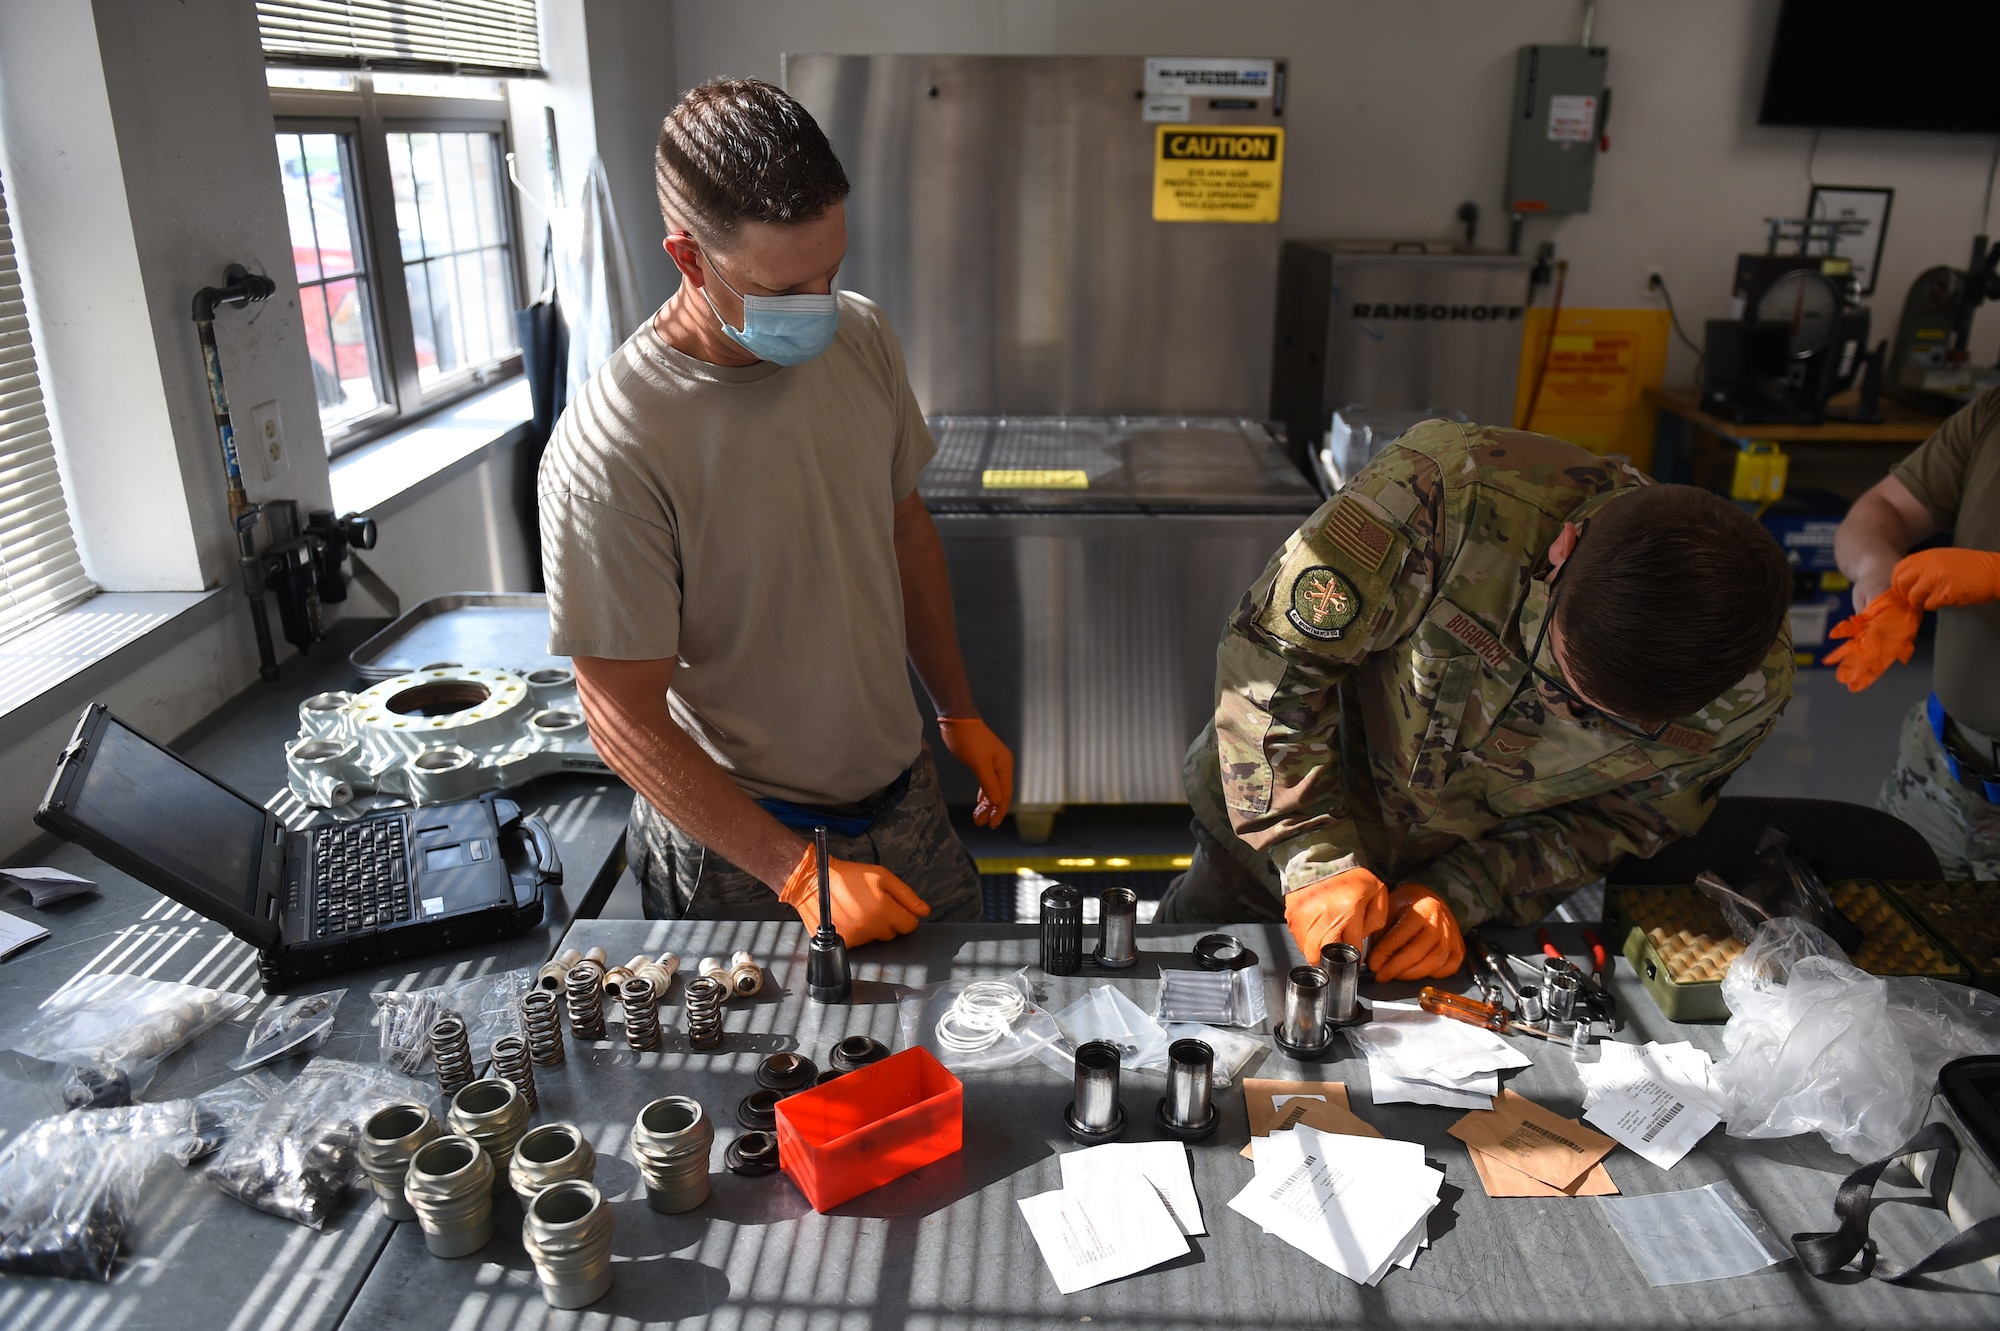 Staff Sgt. Stephan Rozsel and Airman 1st Class Alexander Bogovich, 62nd Maintenance Squadron aircraft hydraulic systems specialists, work on preparing pistons to go into a hydraulic brake system of a C-17 Globemaster III on Joint Base Lewis-McChord, Wash., Sept. 10, 2020. The 62nd MXS hydraulics shop conducts the detailed work that goes into hydraulic brake maintenance on a regular basis. (U.S. Air Force photo by Airman 1st Class Mikayla Heineck)